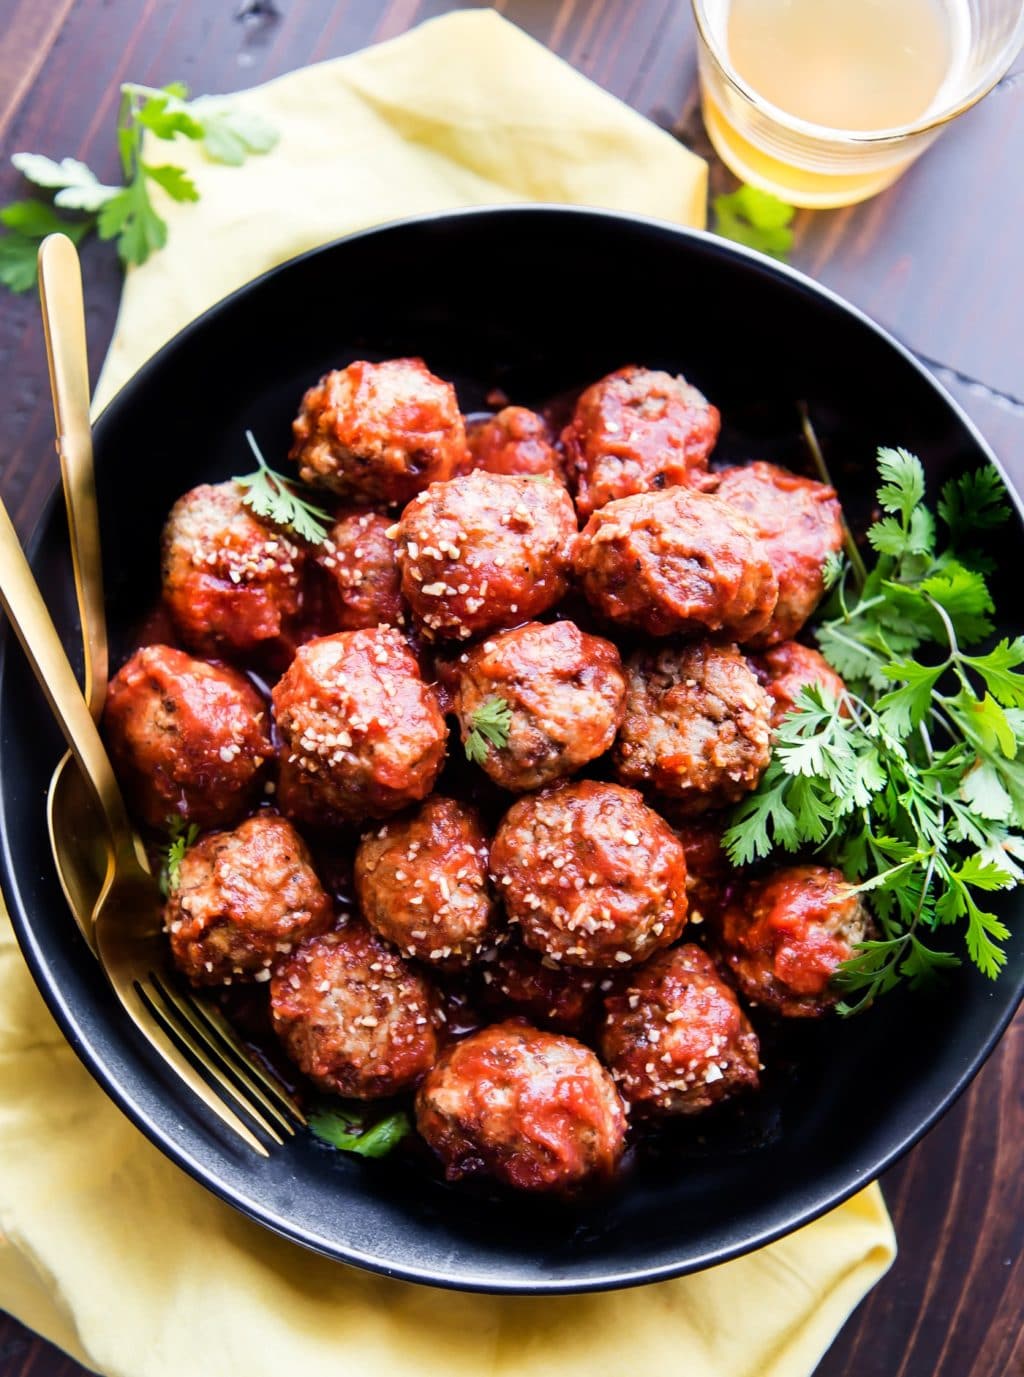 Add this meatball recipe to your list of make ahead freezer meals.